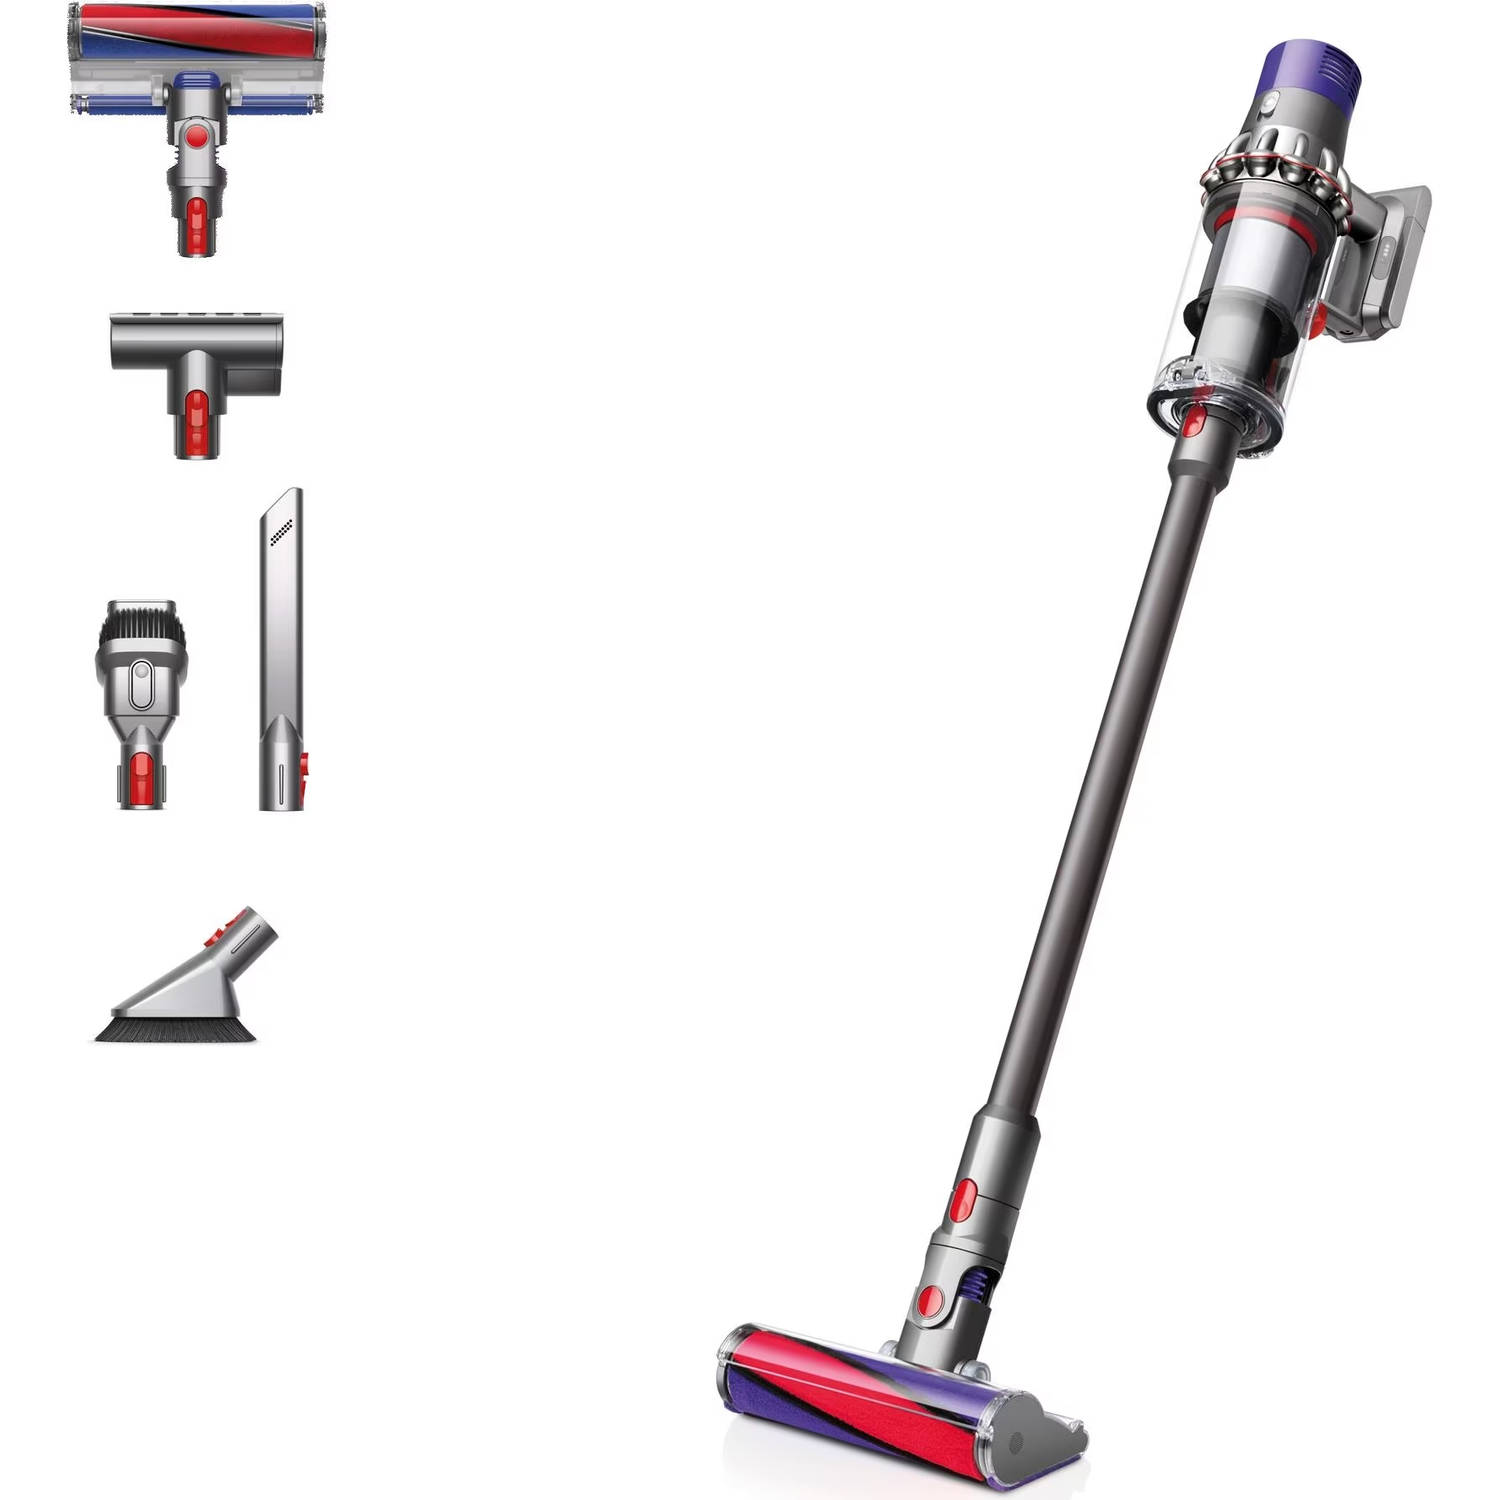 Dyson Cyclone V10 Parquet Zilver met grote korting